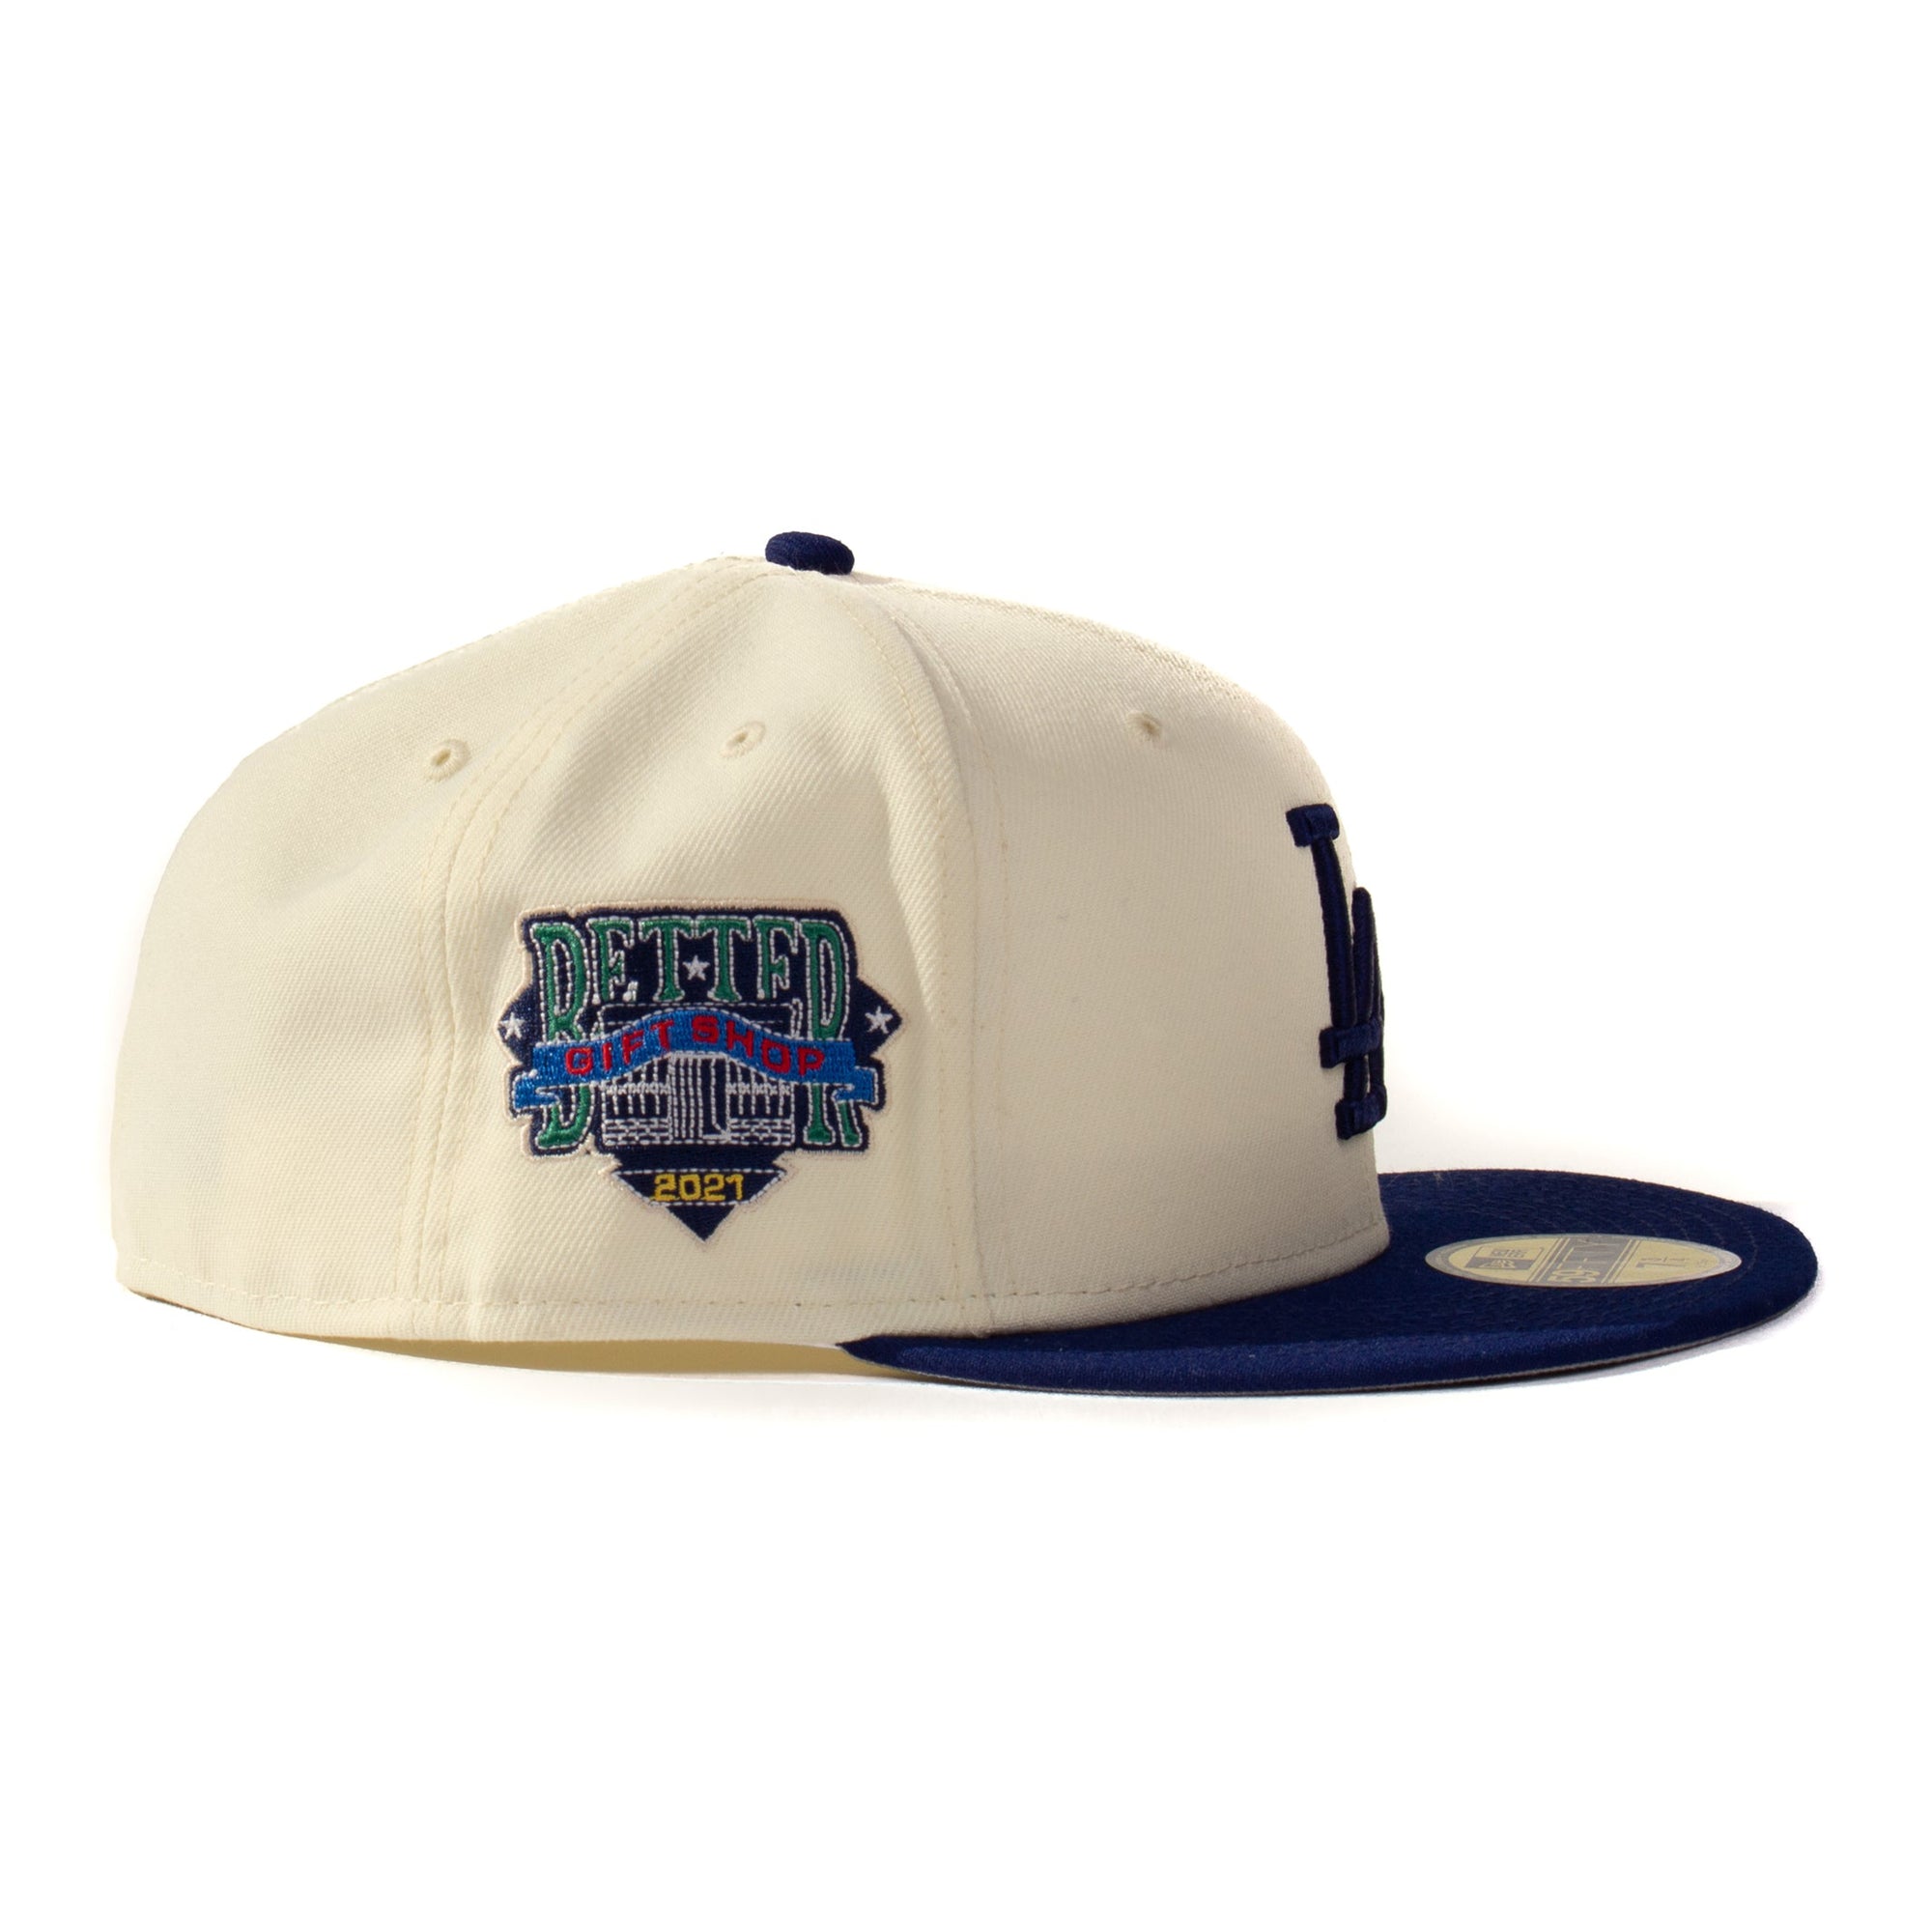 Better™ Gift Shop - MLB  "Dodgers" New Era Fitted - (Cream) view 3